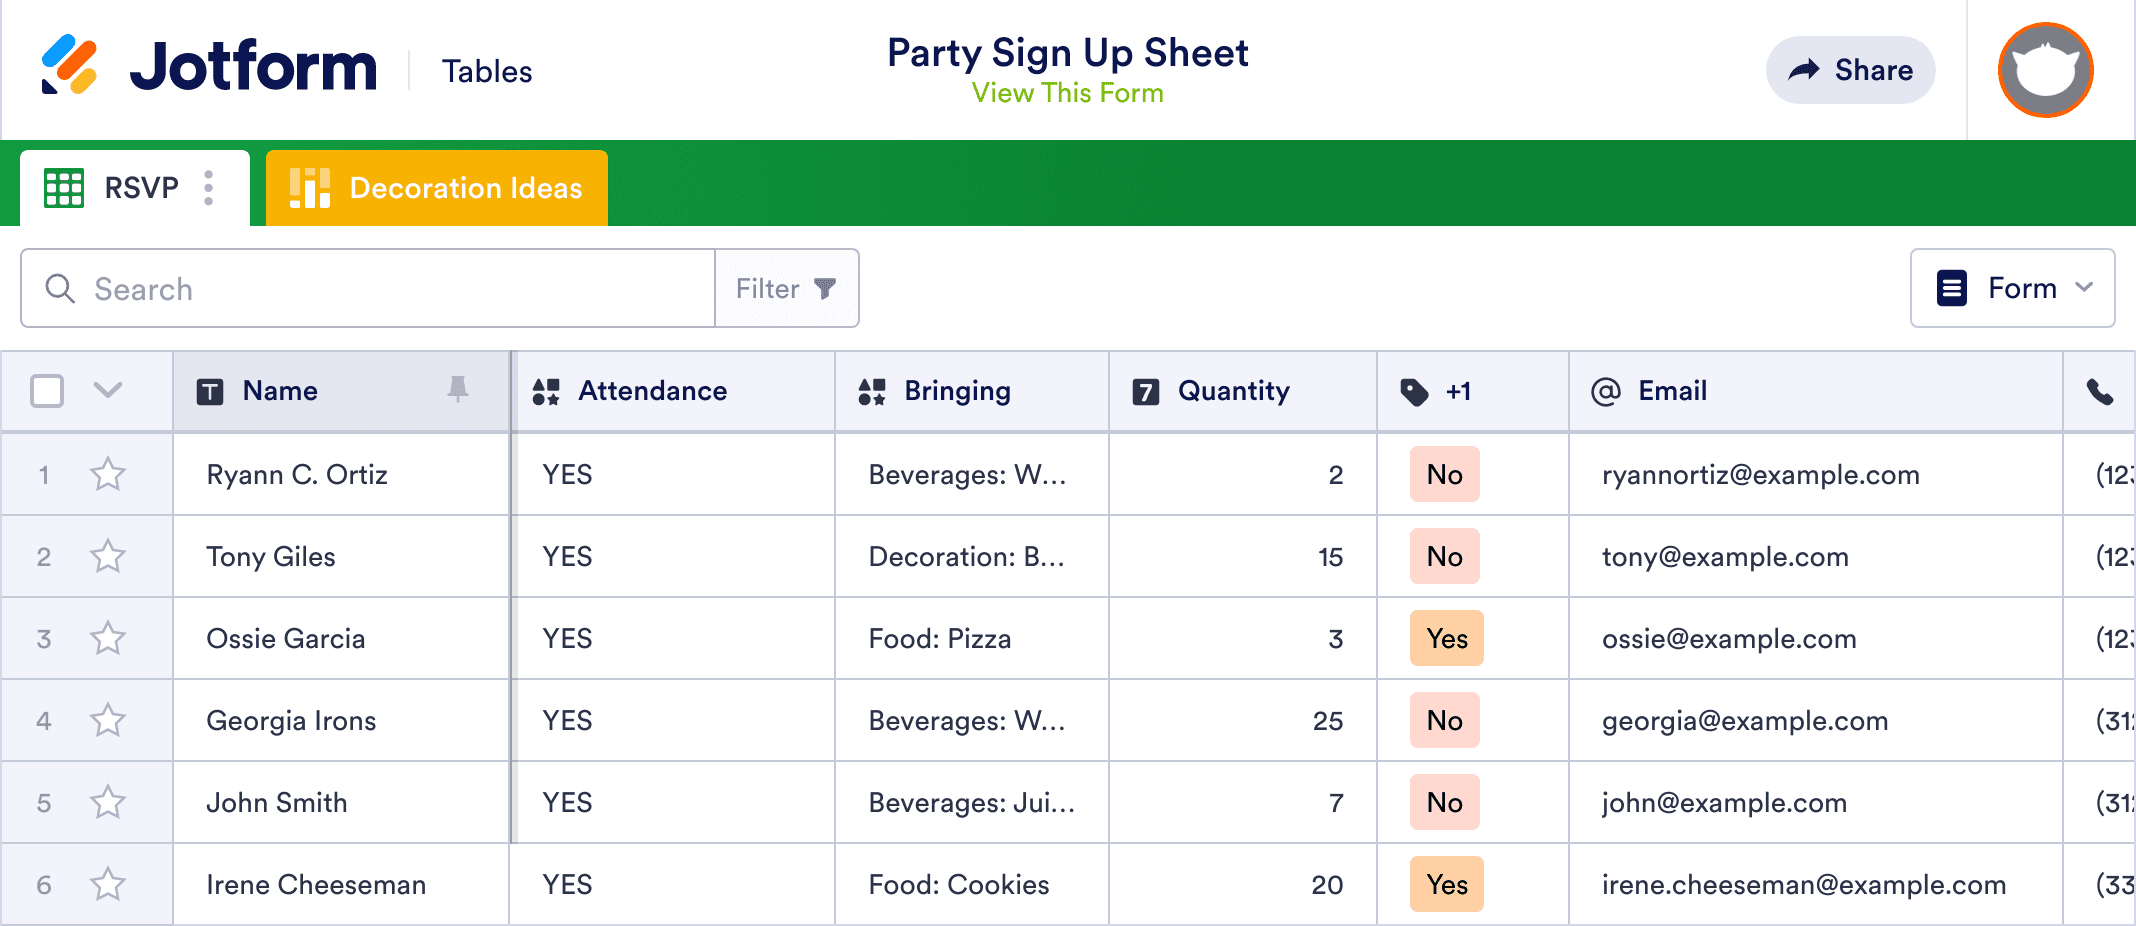 Party Sign Up Sheet